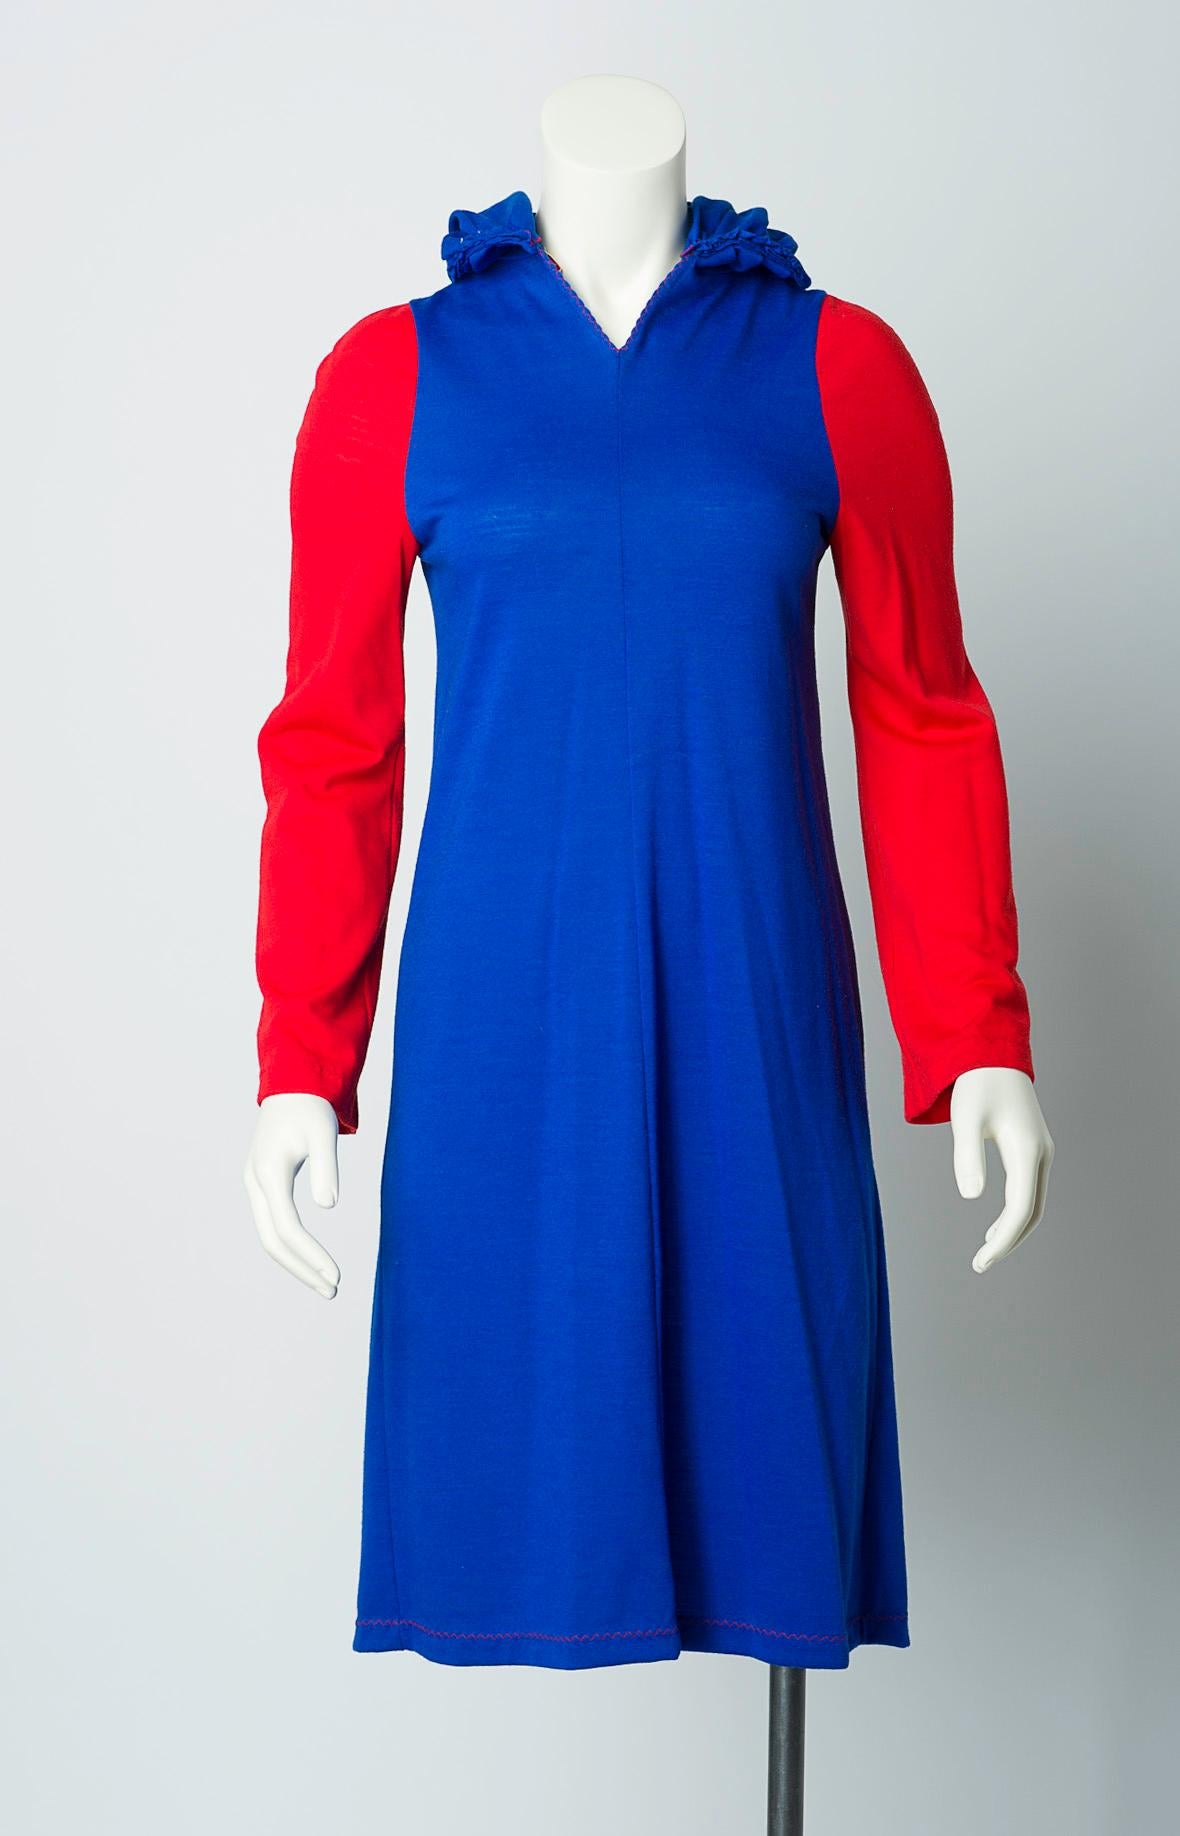 Stephen Burrows red and blue color block dress in lightweight knit. Lettuce edge at hood and red zig zag stitch at hem and seams. Pullover, no closures.

Fabric: Lightweight knit, feels like wool-cotton blend.

Includes Stephen Burrow's World and